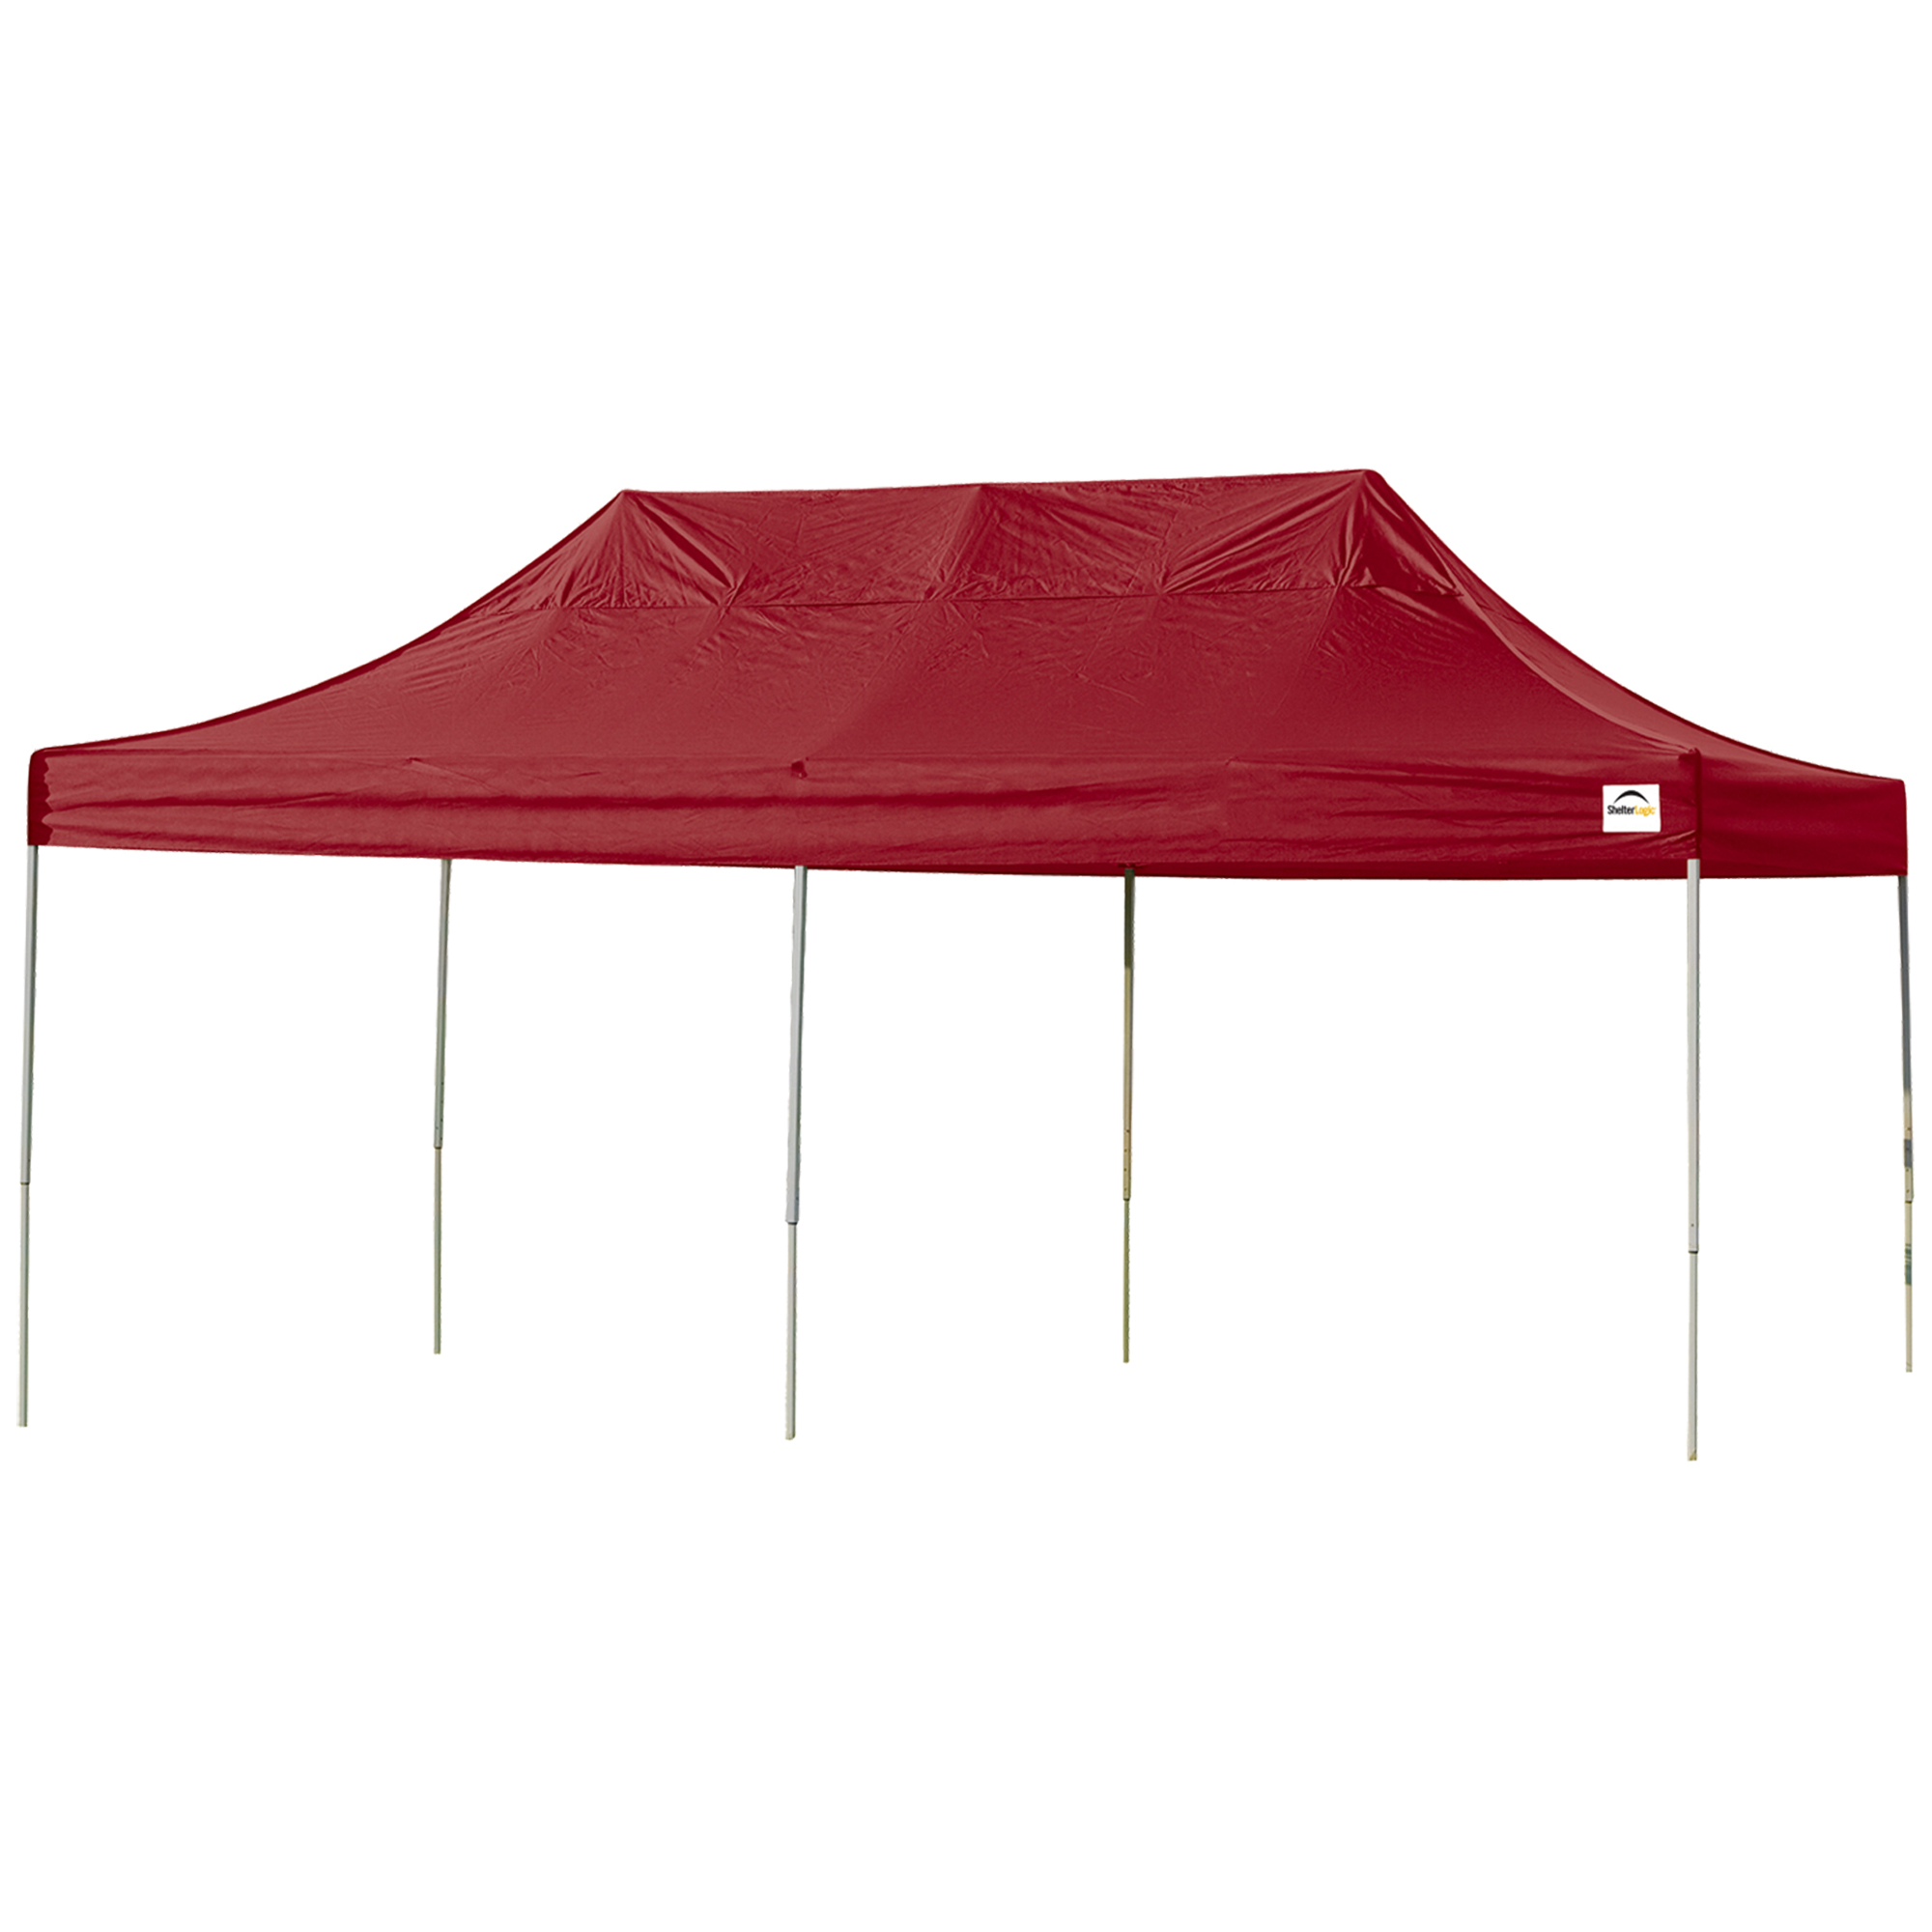 10ft. X 20ft. Pro Pop-up Canopy Straight Leg, Red Cover